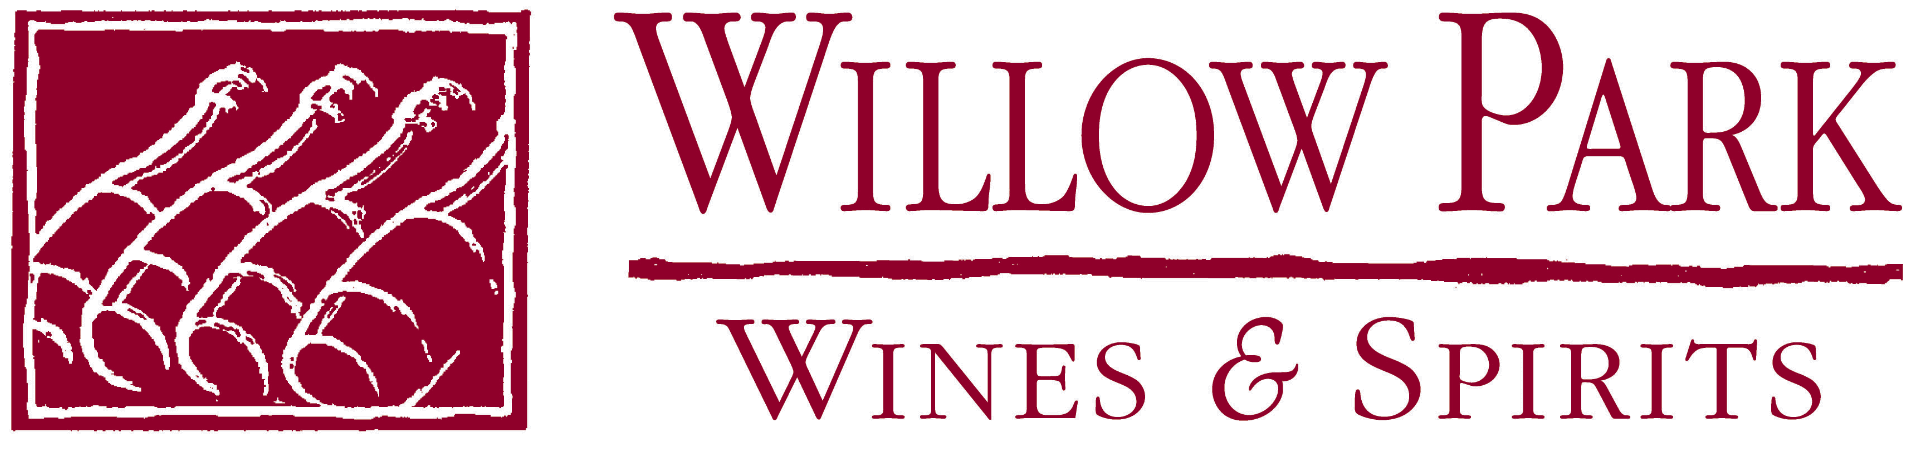 Willow Park Wine and Spirits Logo